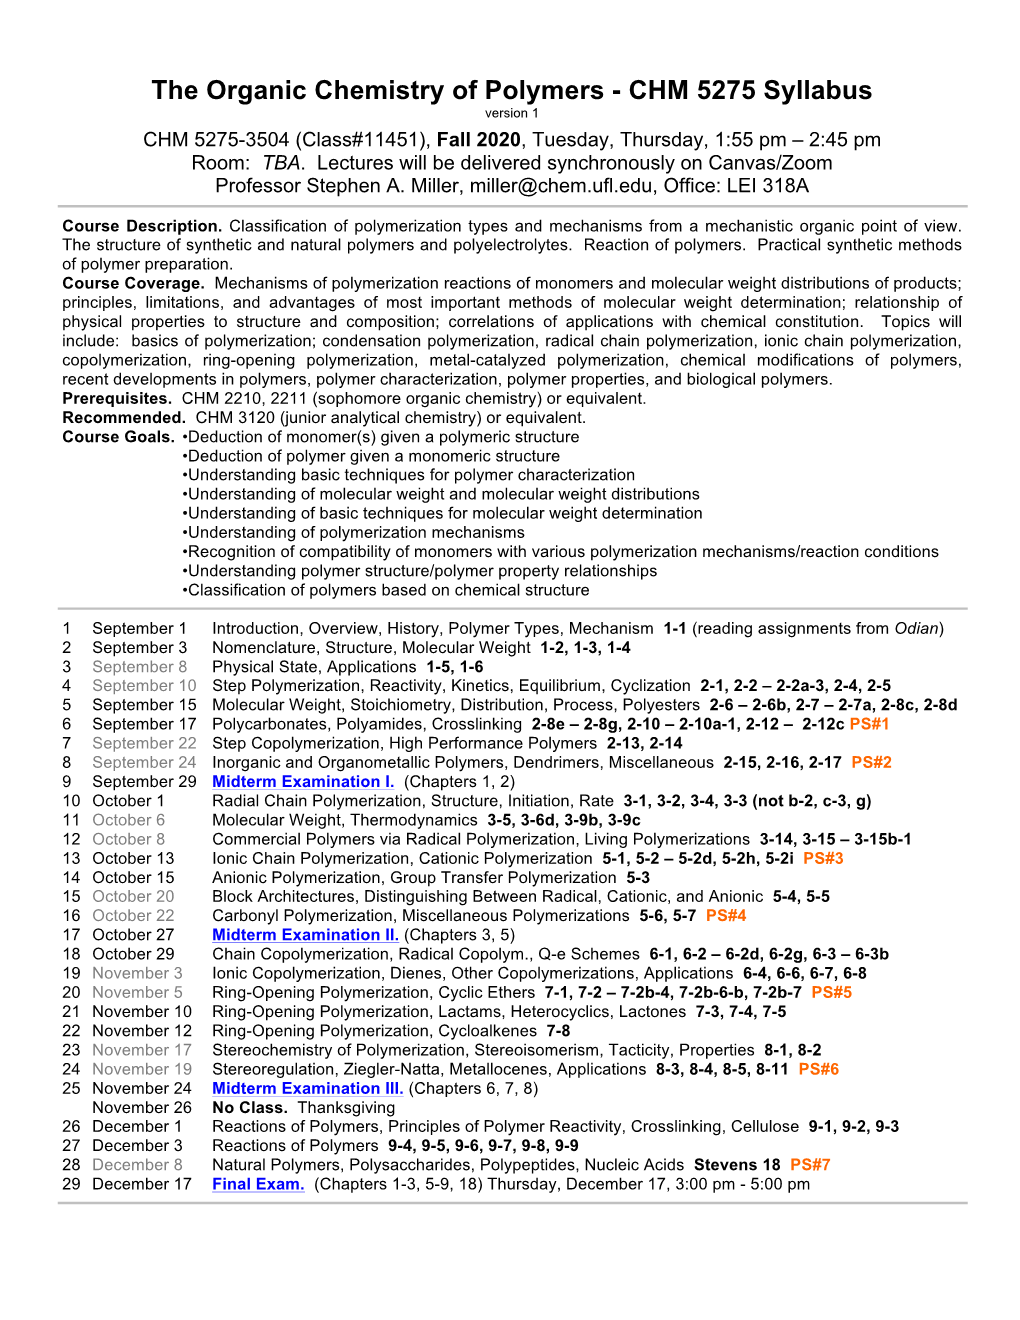 The Organic Chemistry of Polymers - CHM 5275 Syllabus Version 1